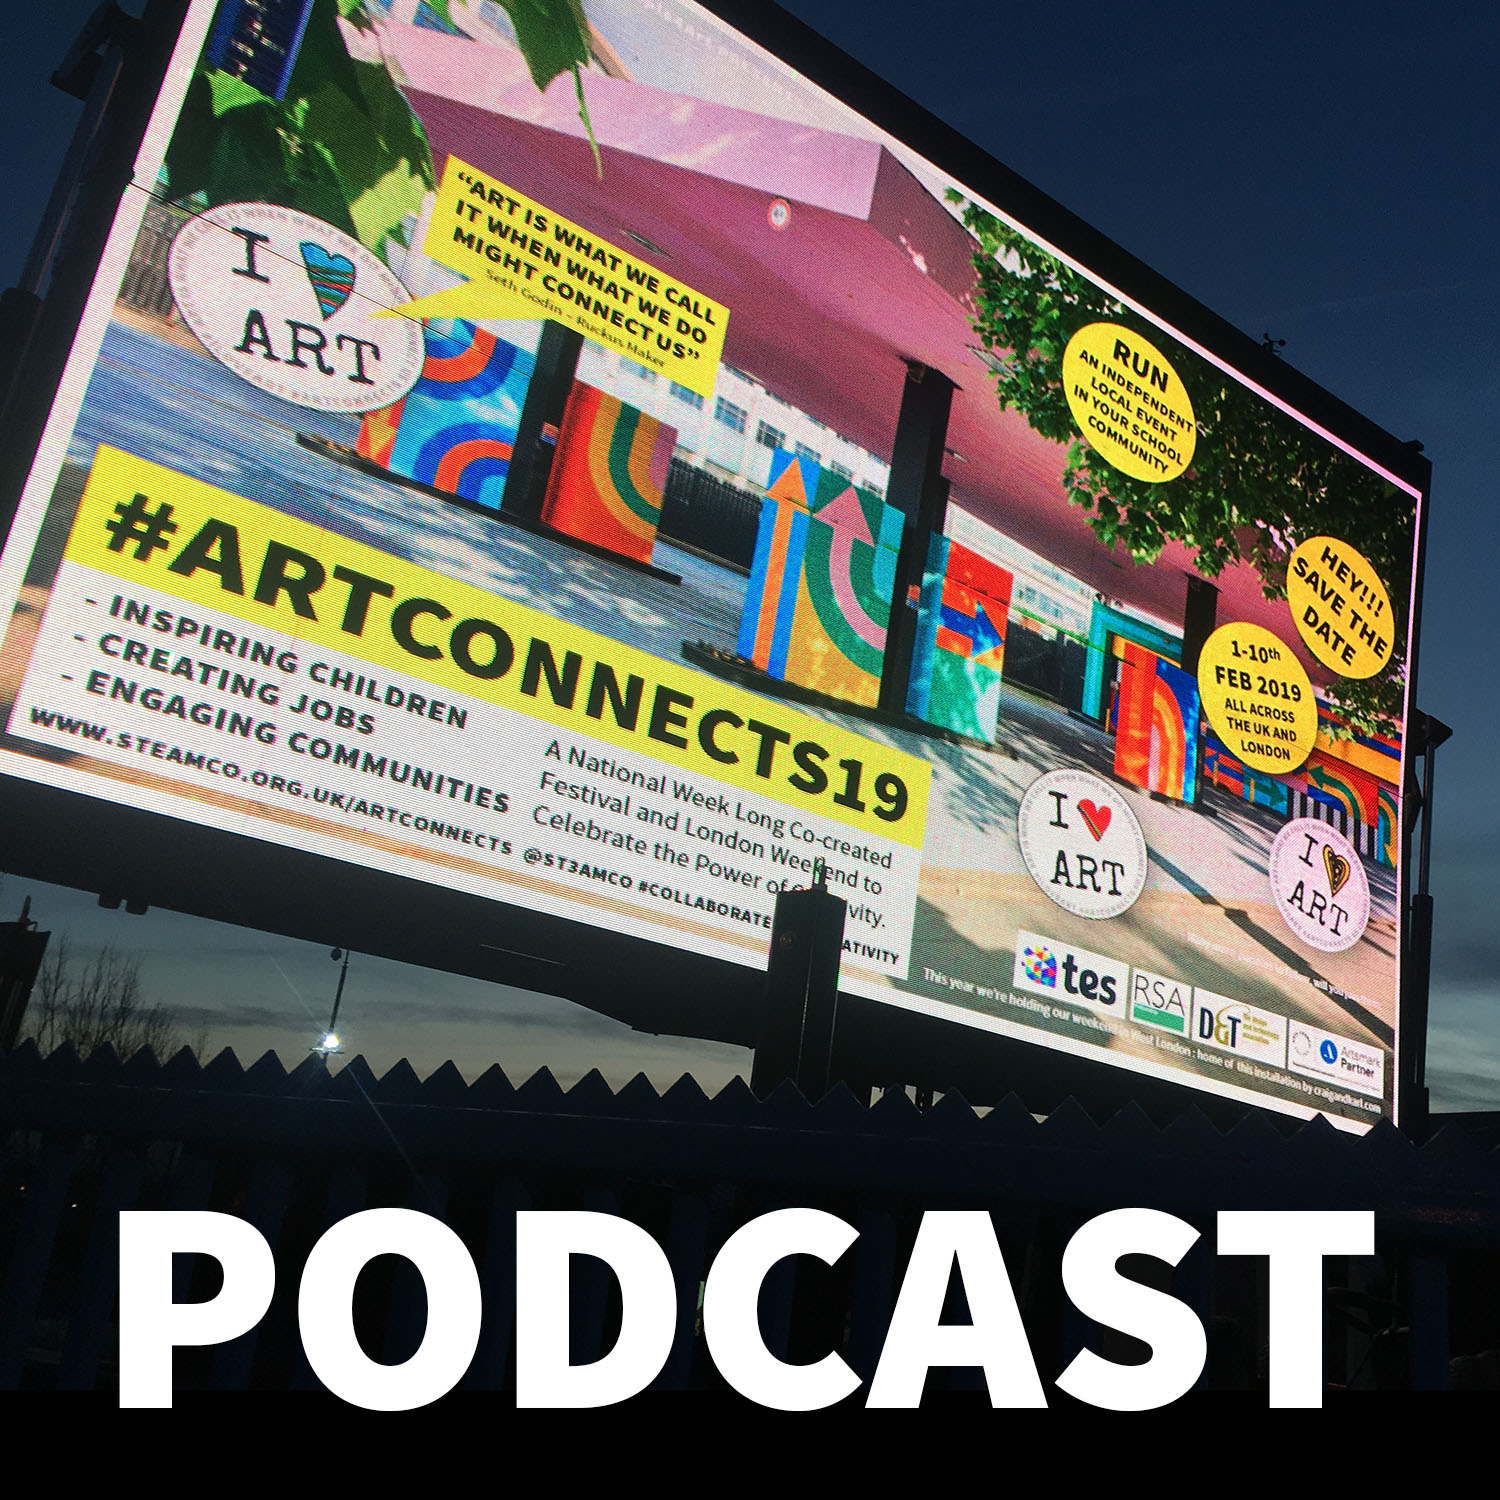 ARTCONNECTS19 Podcast image.jpg